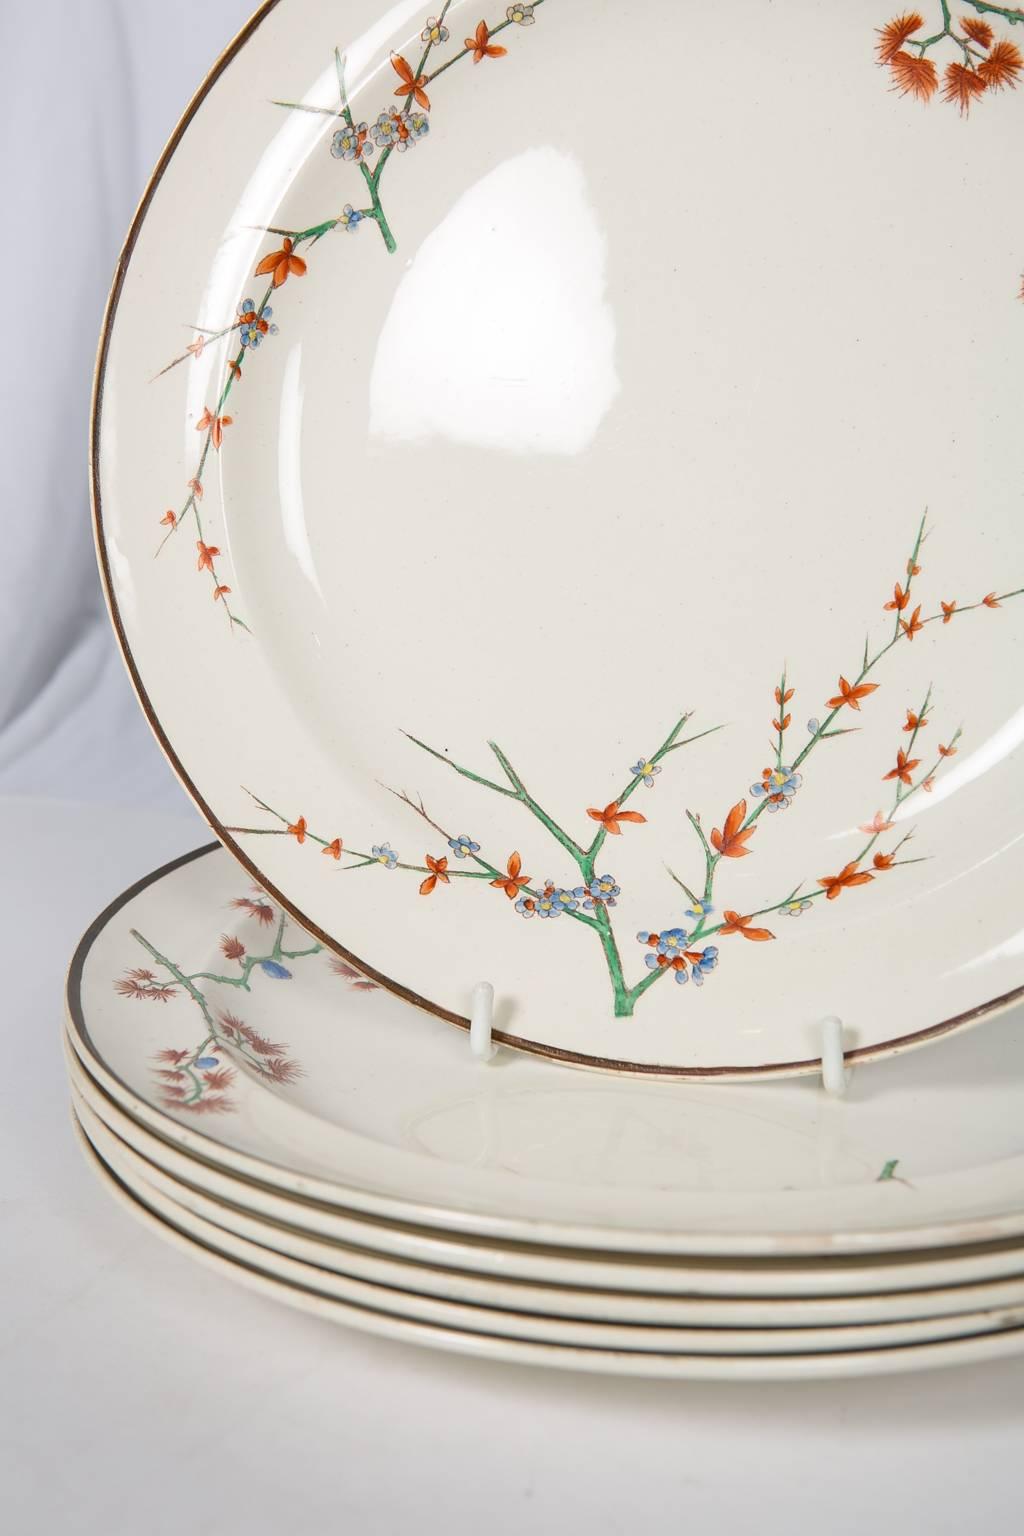 Aesthetic Movement 26 Wedgwood Creamware Dinner Plates with Thistle Design Made, circa 1880 For Sale